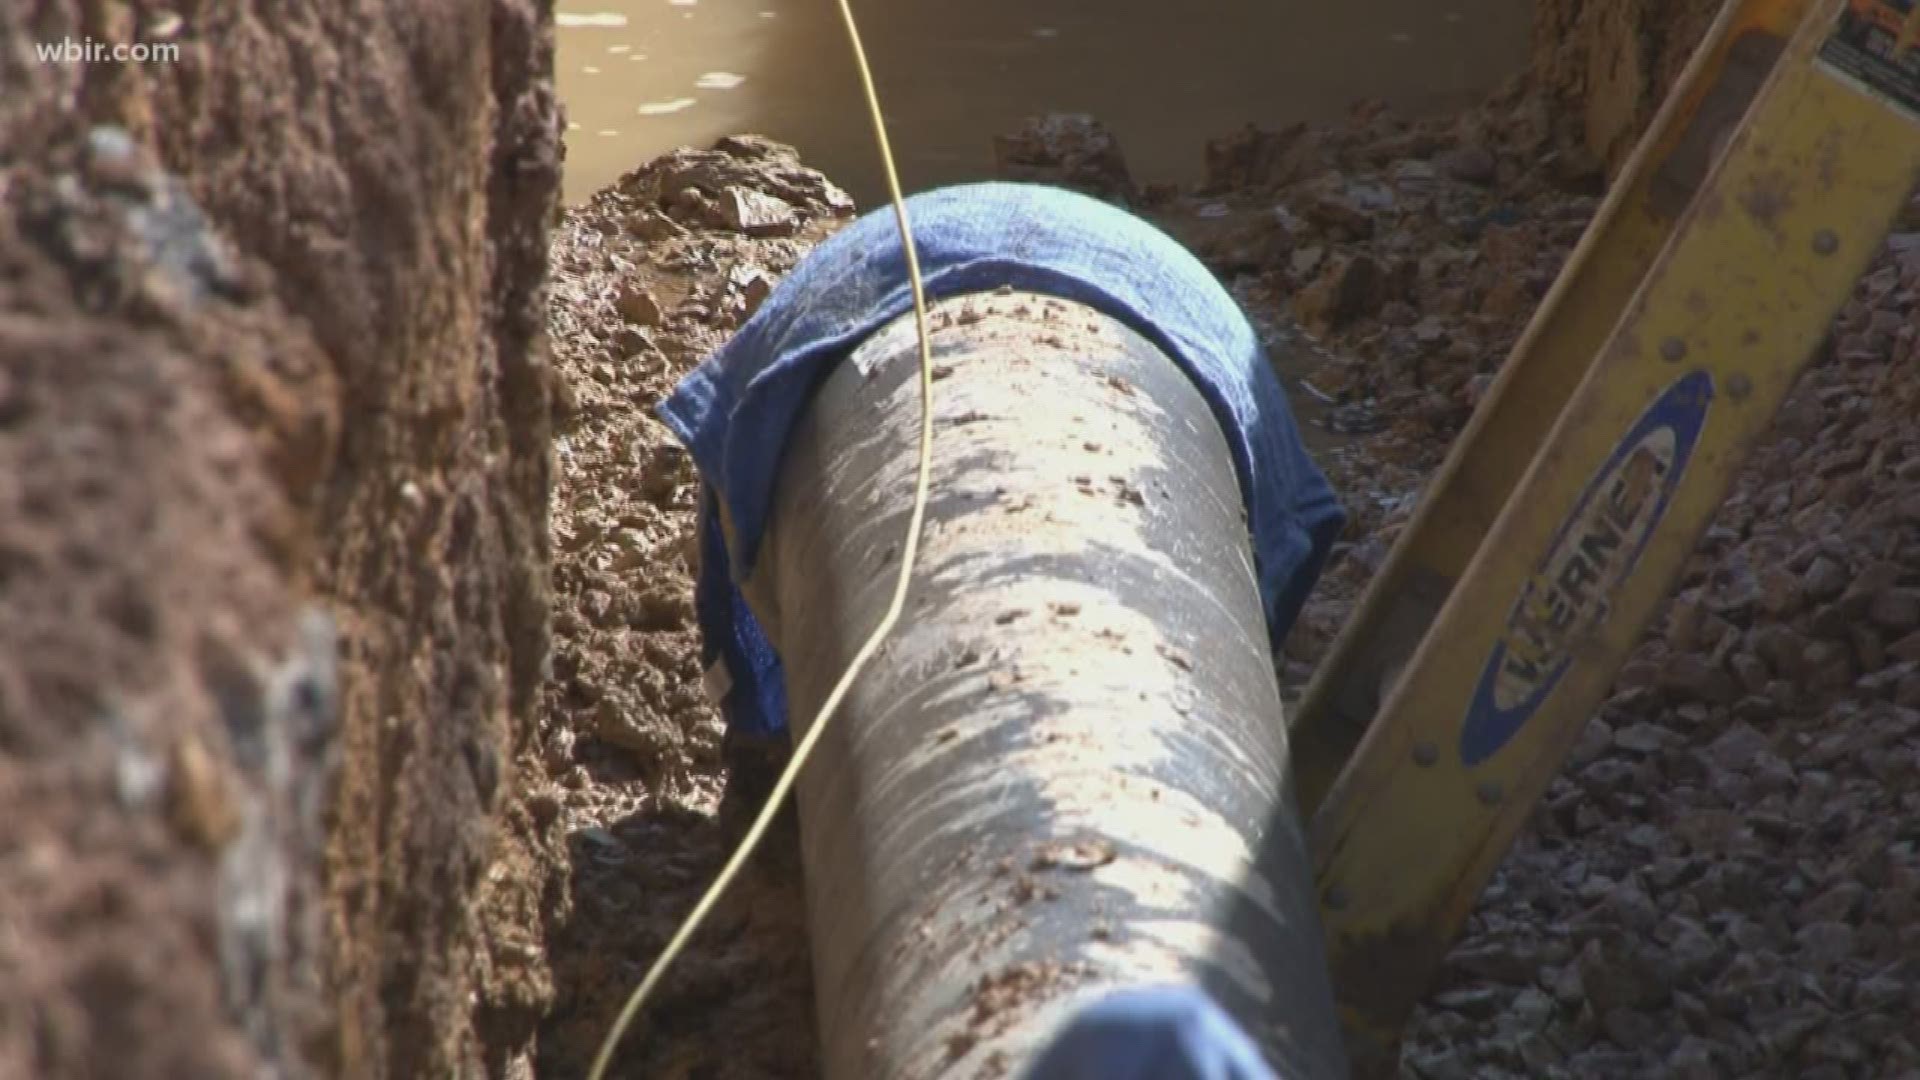 KUB says over the past week-- a water main in Fountain City broke 7 times.